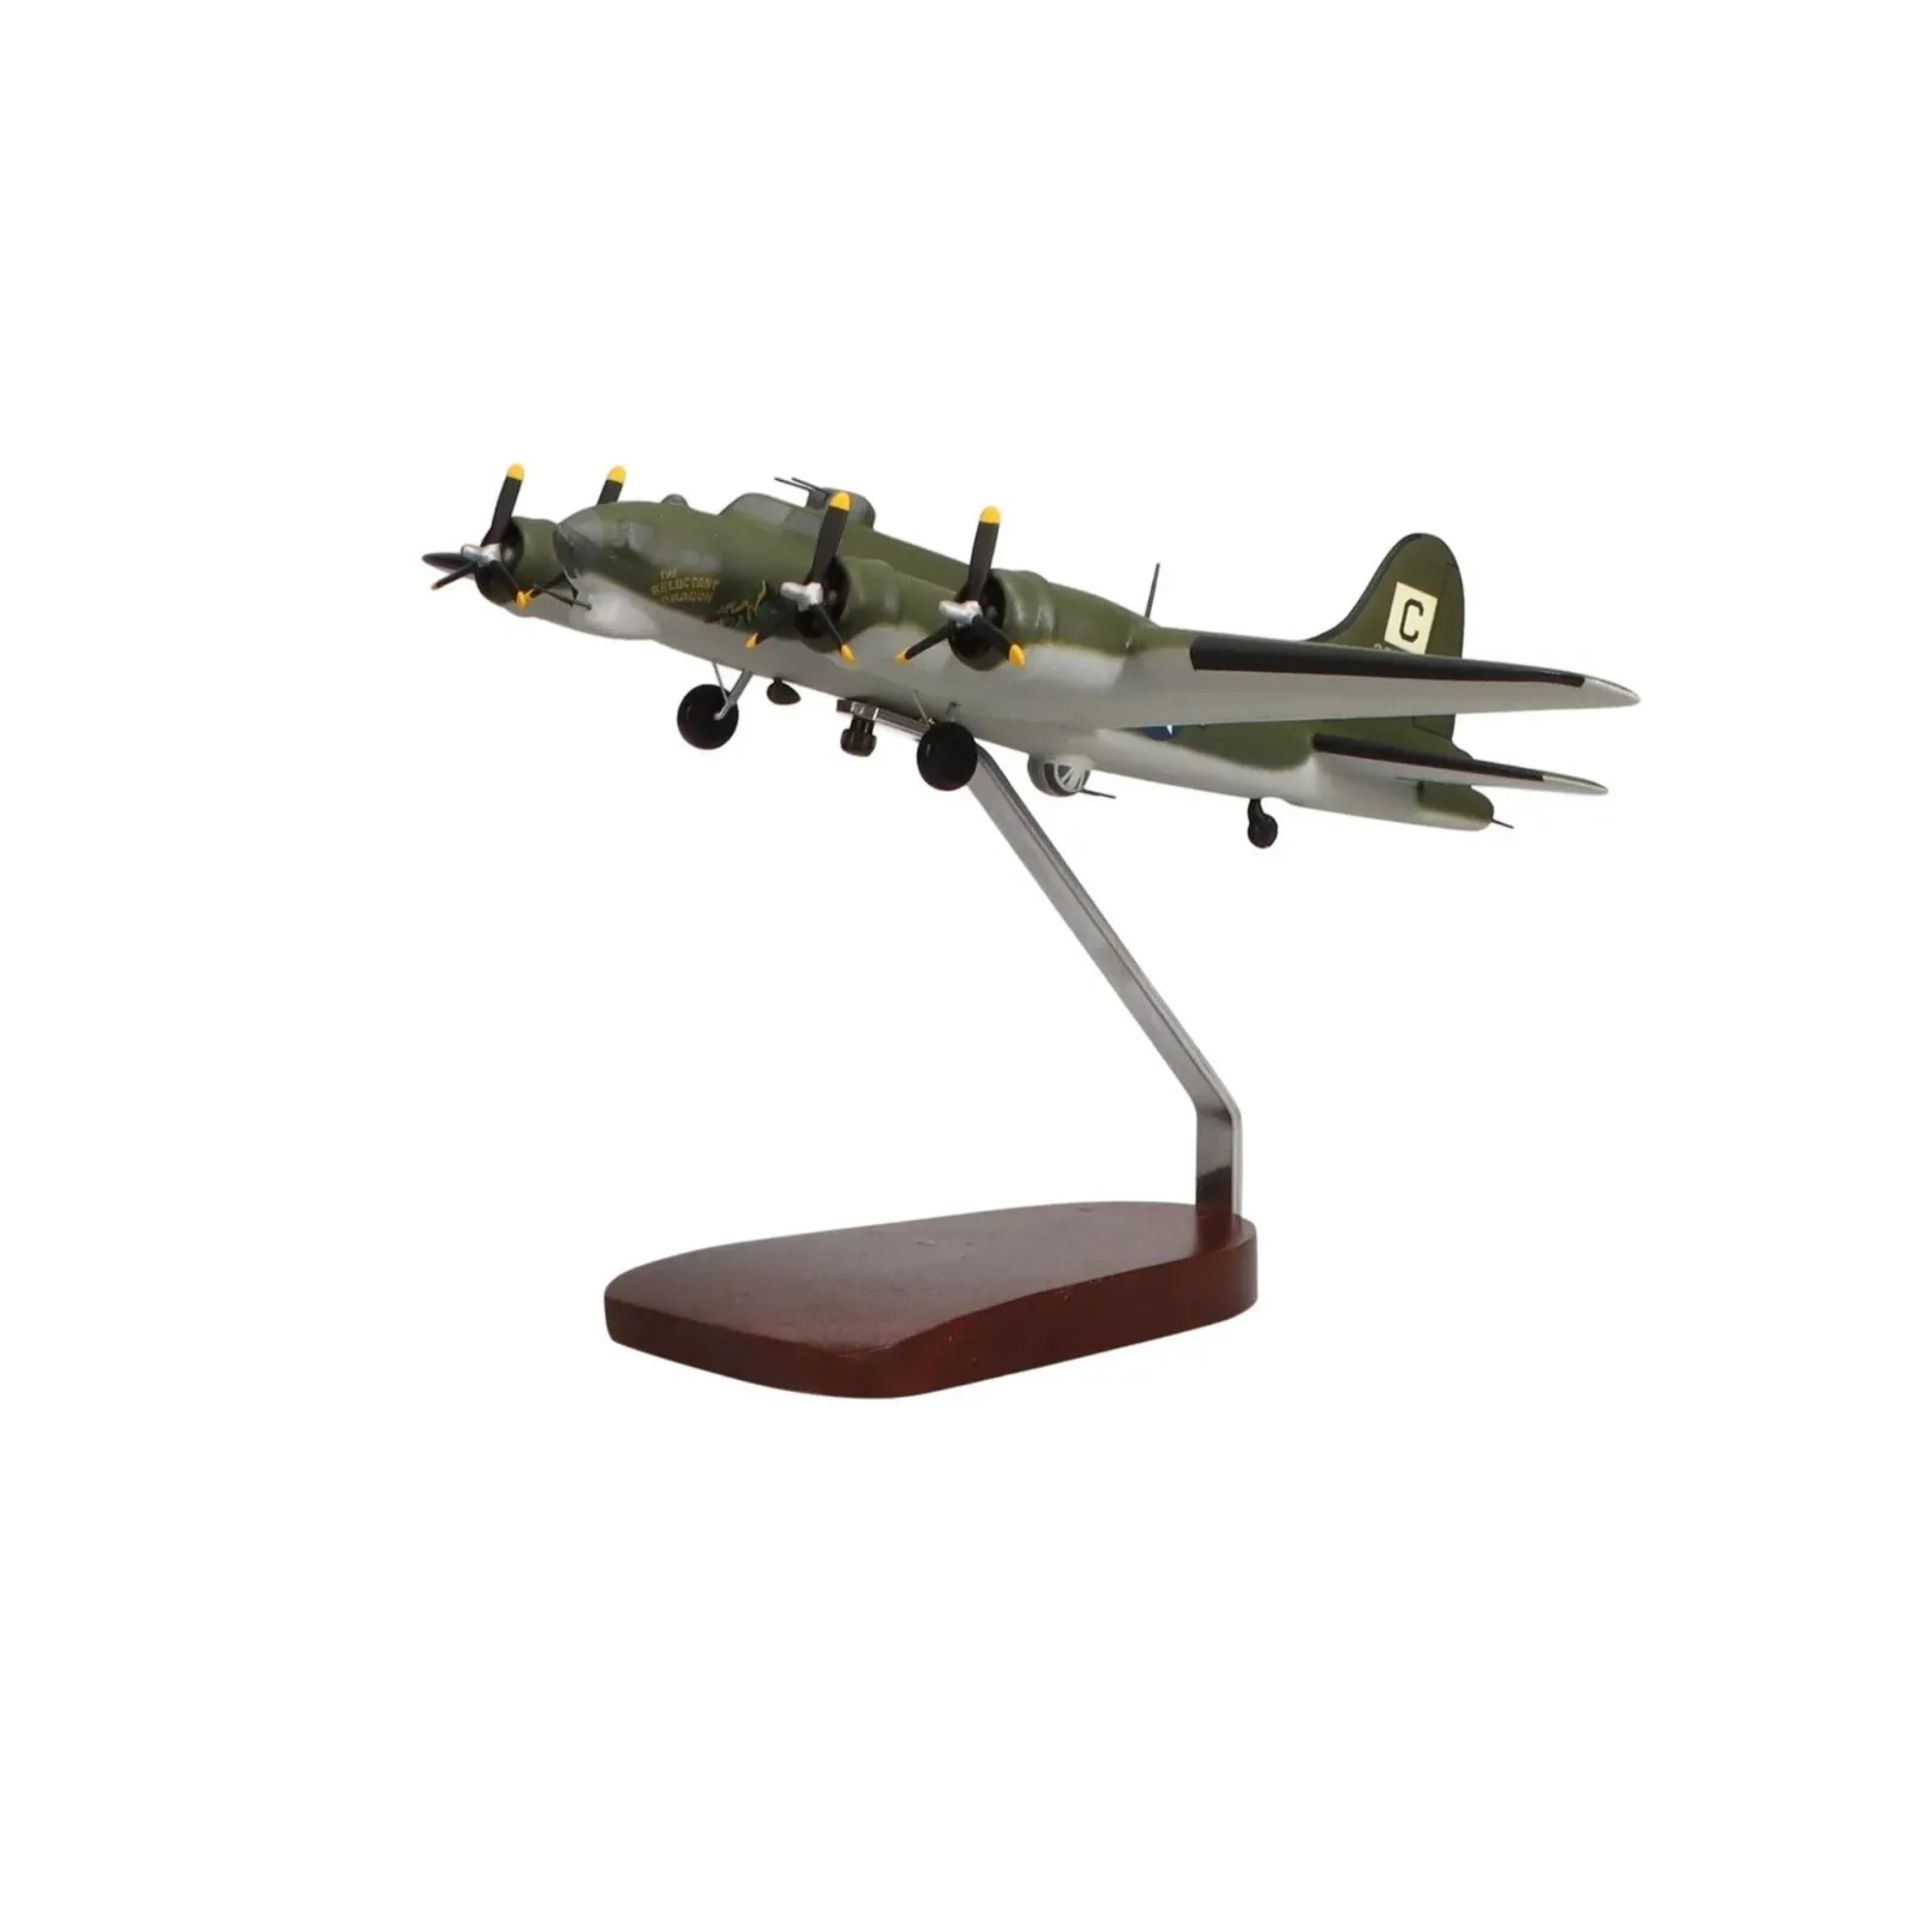 Boeing B17 Flying Fortress Scale Model - Image 3 of 4